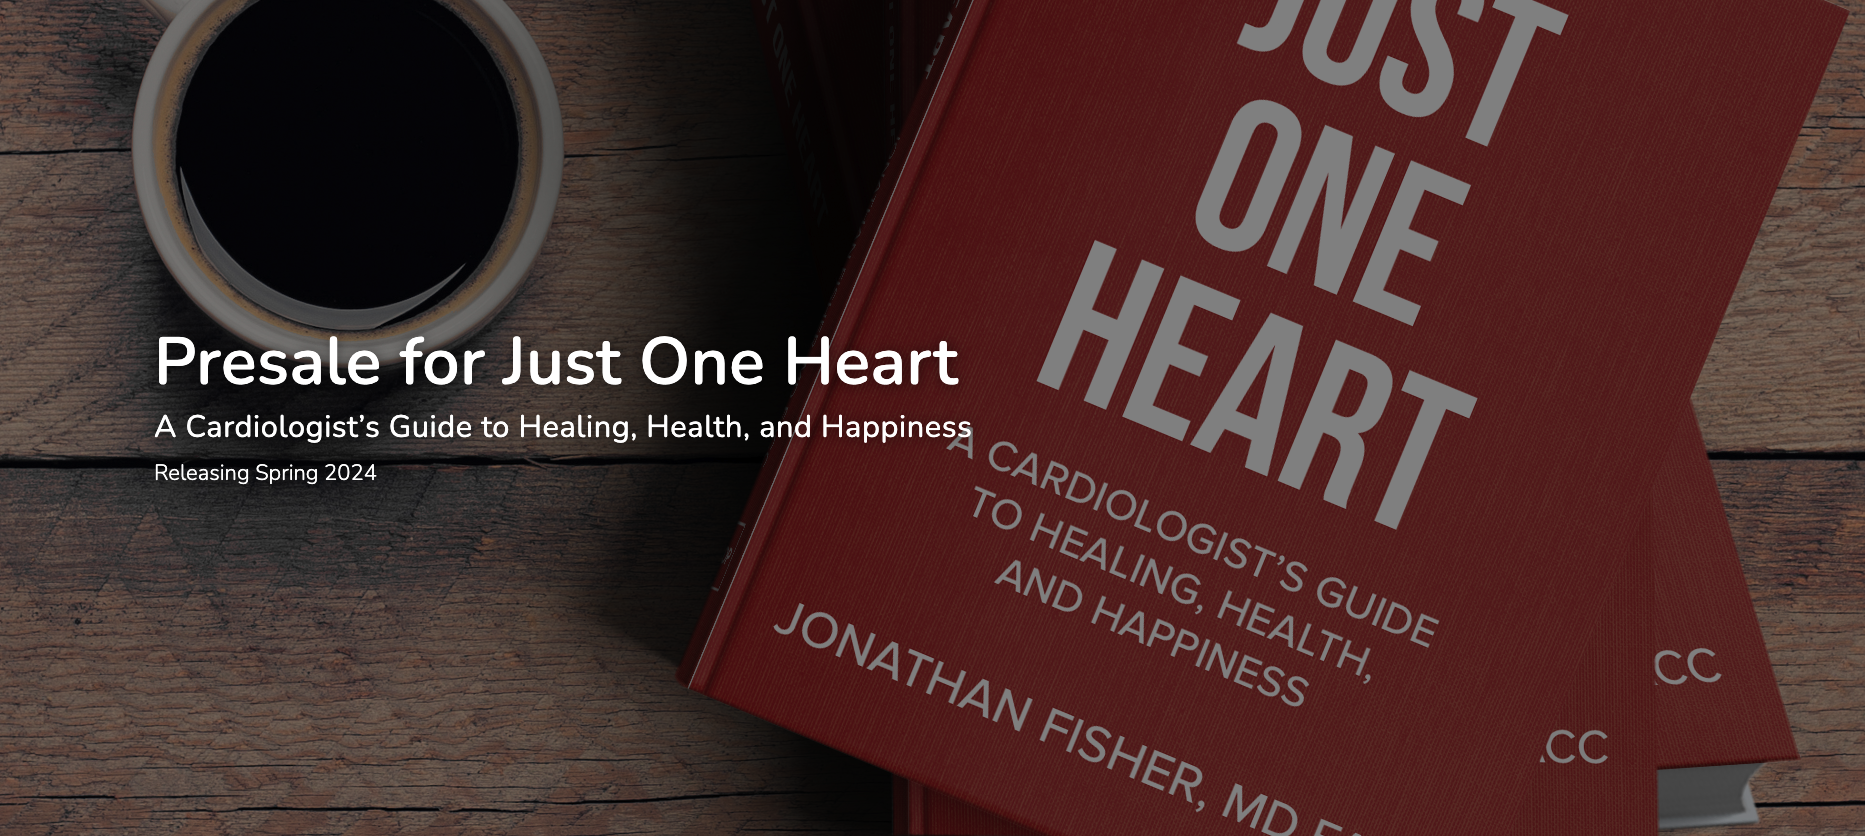 JUST ONE HEART: A CARDIOLOGIST’S GUIDE TO HEALING, HEALTH, AND HAPPINESS - Jonathan Fisher